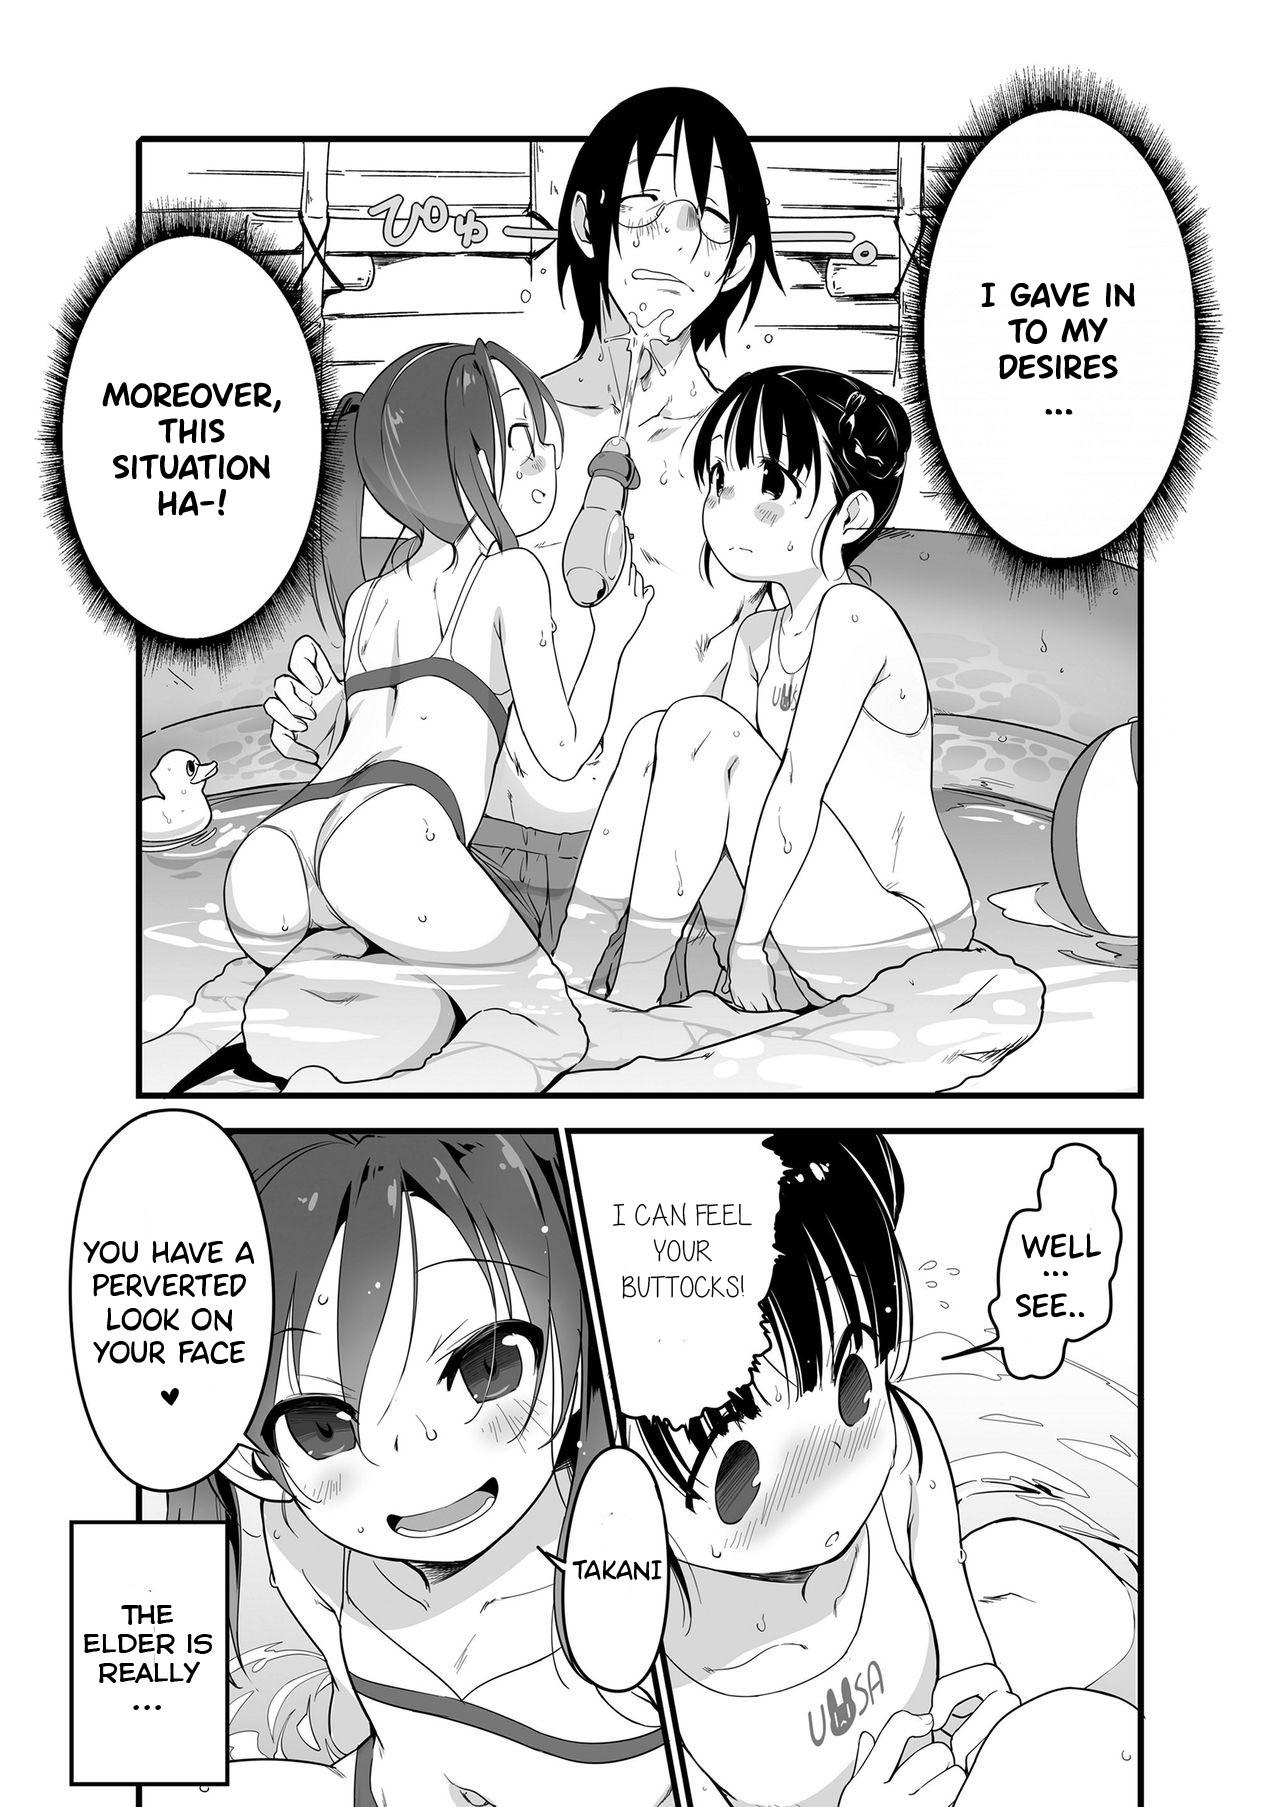 Perfect Tits Uchiage Hanabi, Ane to Miruka? Imouto to Miruka? | Fireworks, Should we see it with the elder sister or the younger sister? Gay Longhair - Page 6